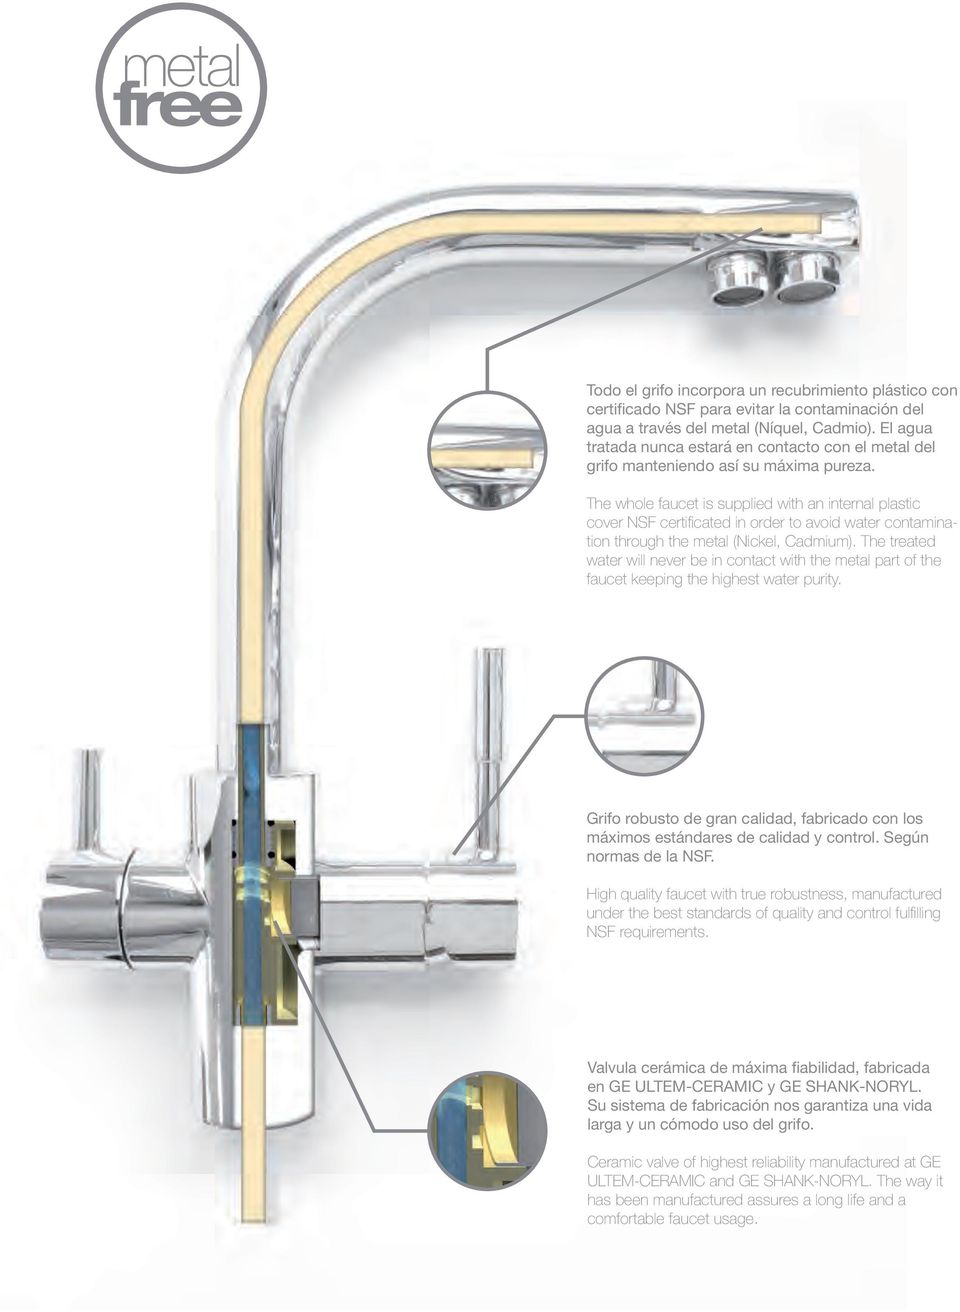 The whole faucet is supplied with an internal plastic cover NSF certificated in order to avoid water contamination through the metal (Nickel, Cadmium).